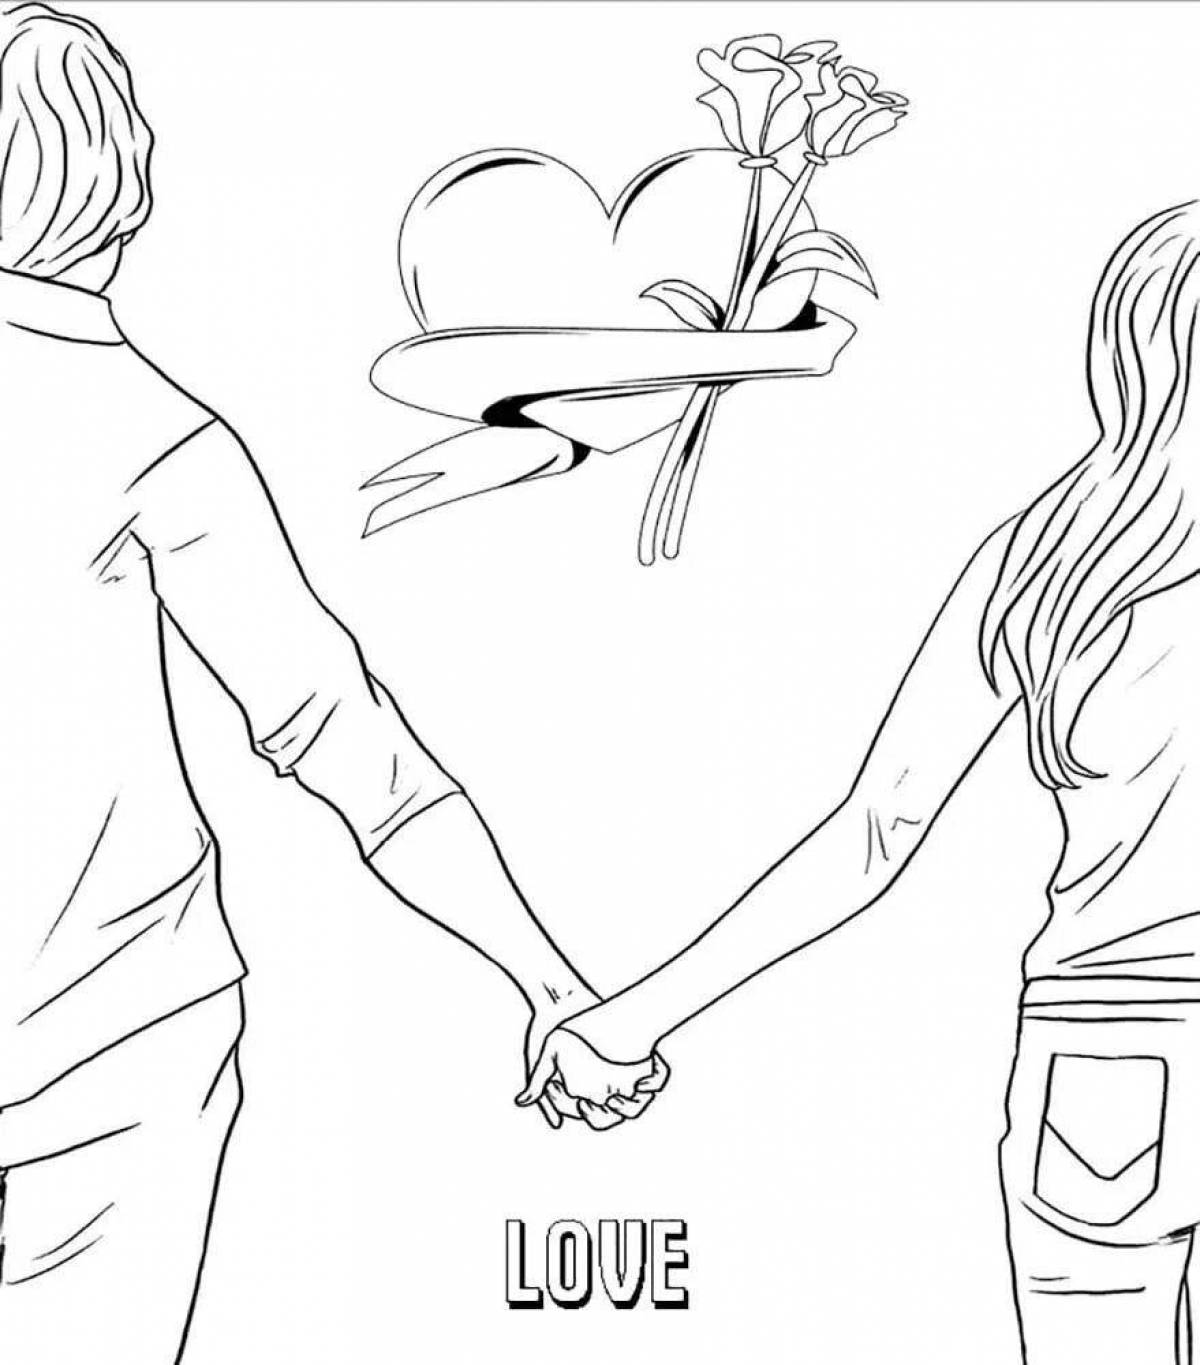 Lovers of cute coloring pages